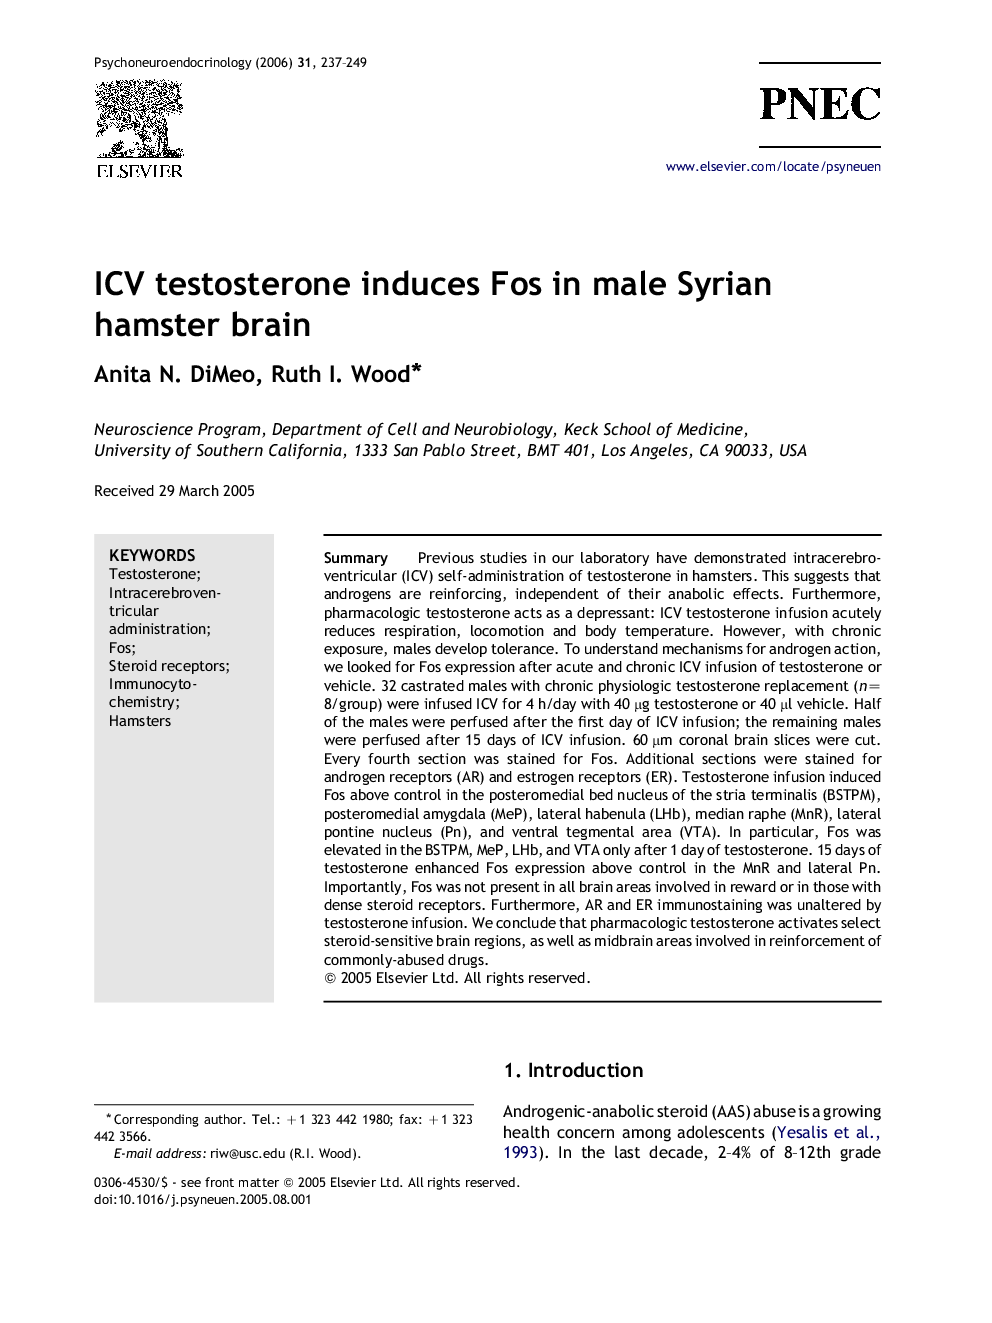 ICV testosterone induces Fos in male Syrian hamster brain